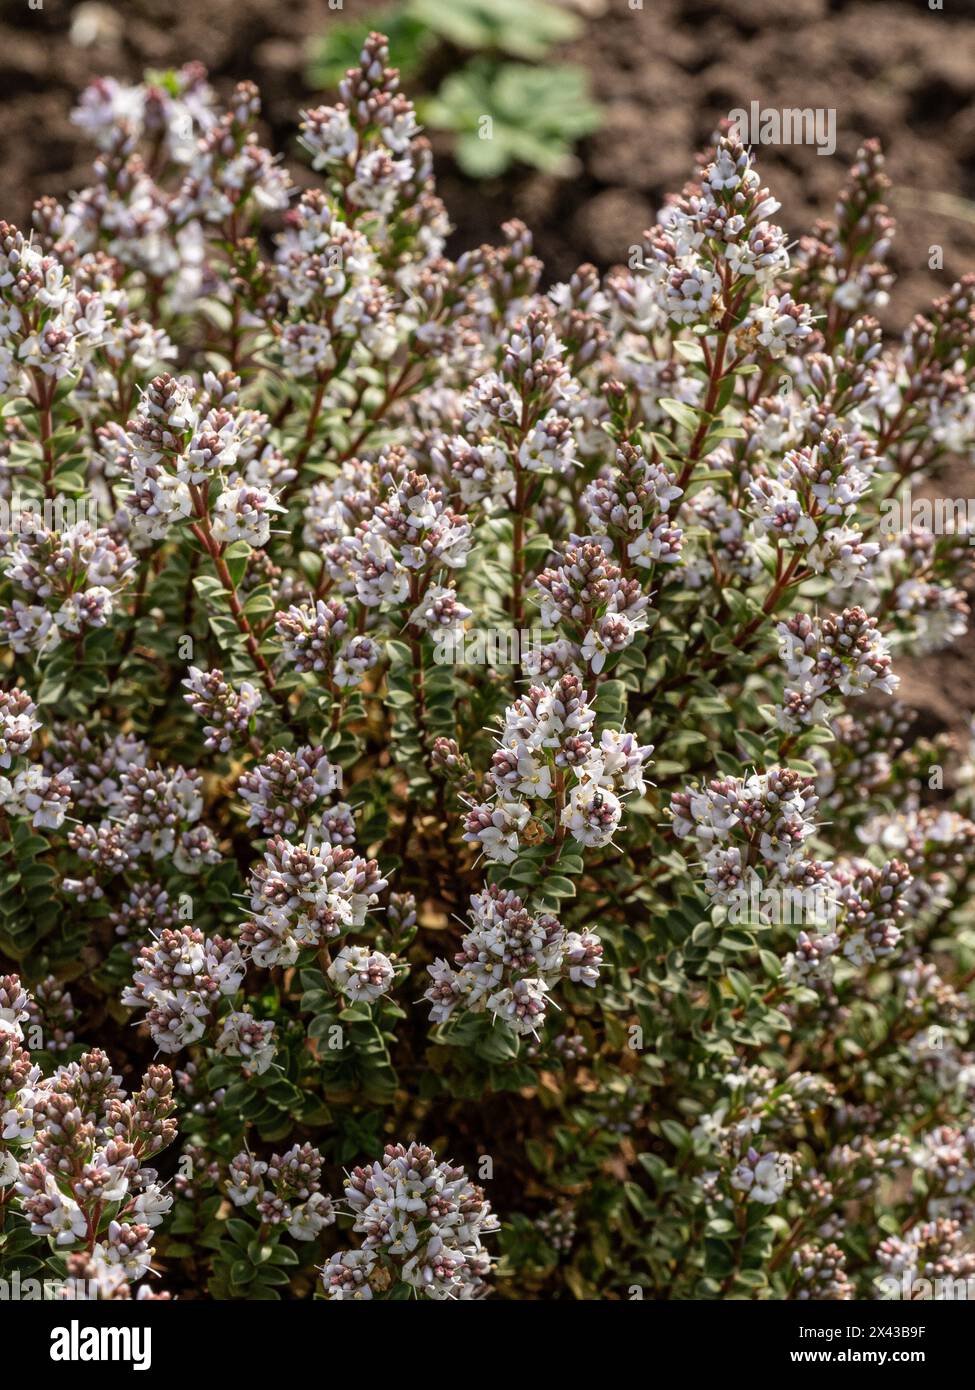 The dwarf hebe Hebe 'Baby' covered in small delicate very pale pink flowers Stock Photo